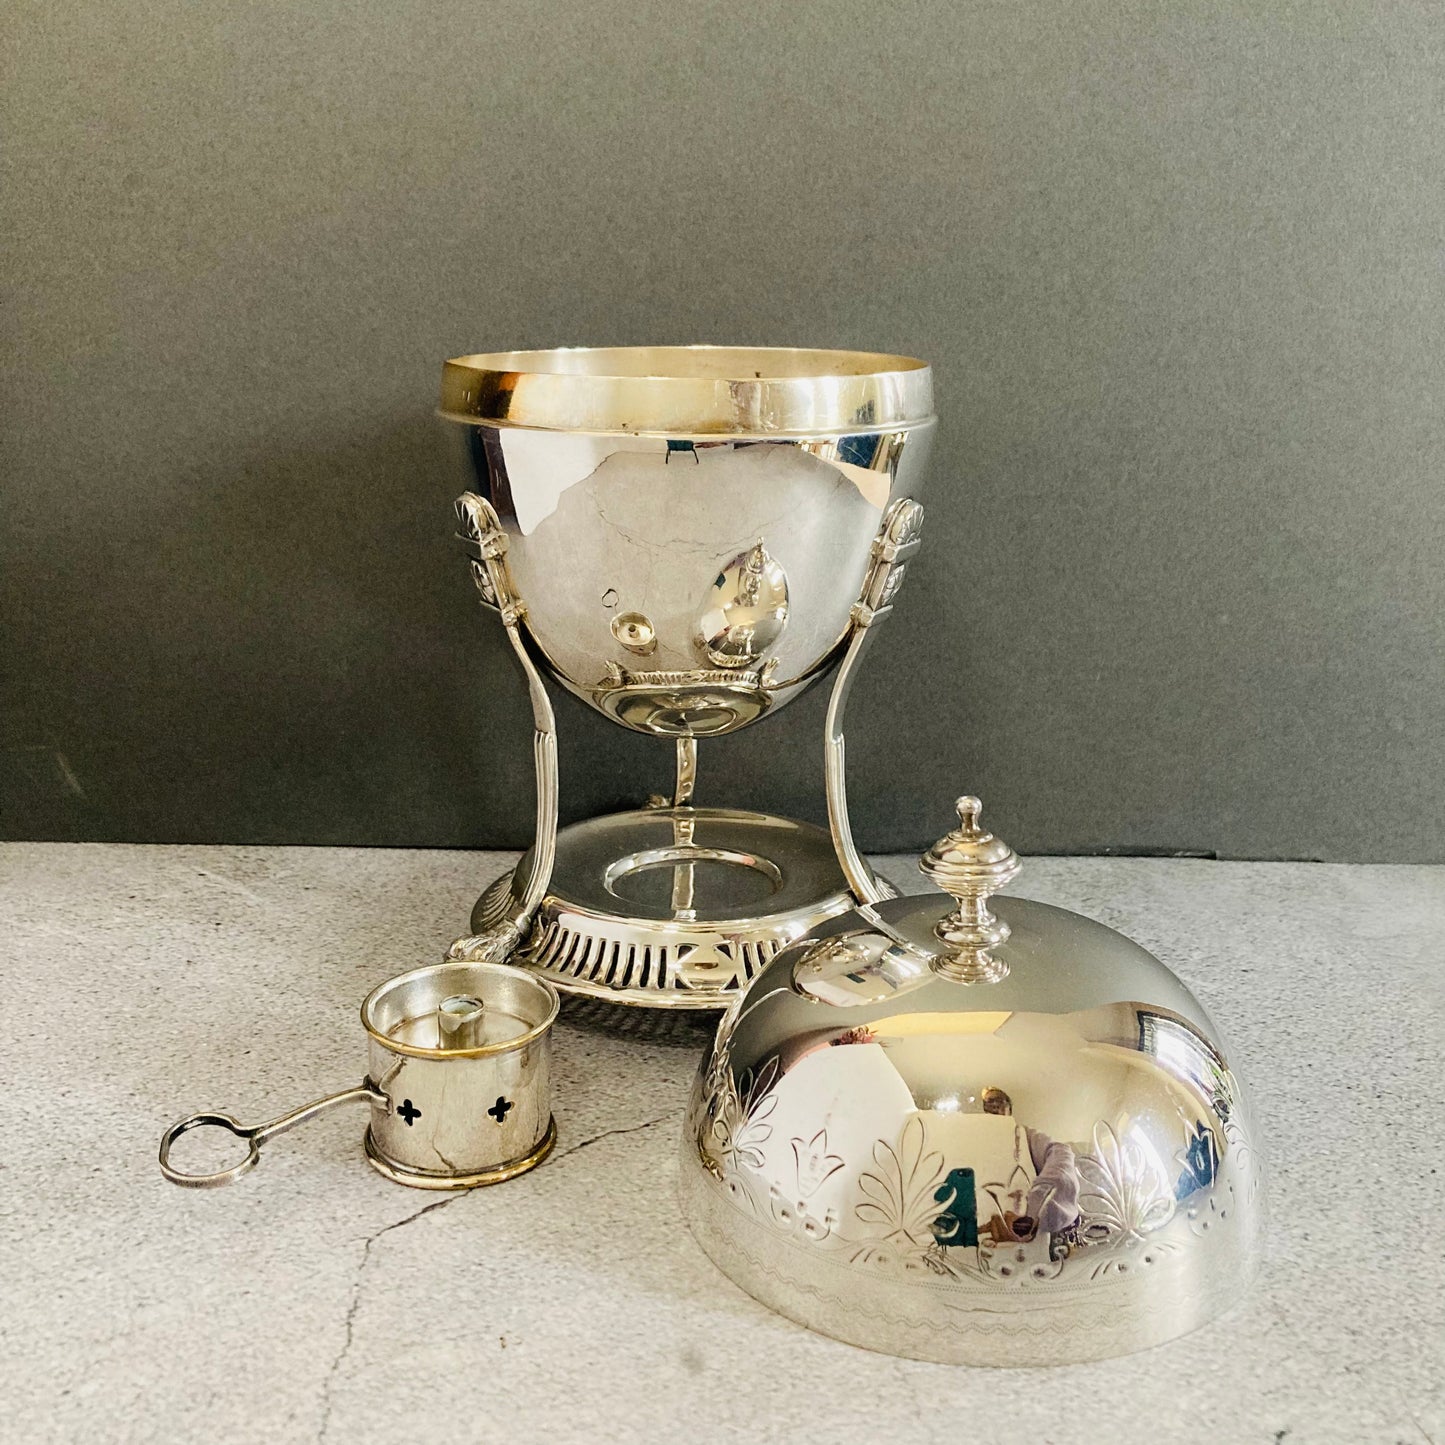 The Groom Max - Antique Silver Plated Egg Coddler with Engraving